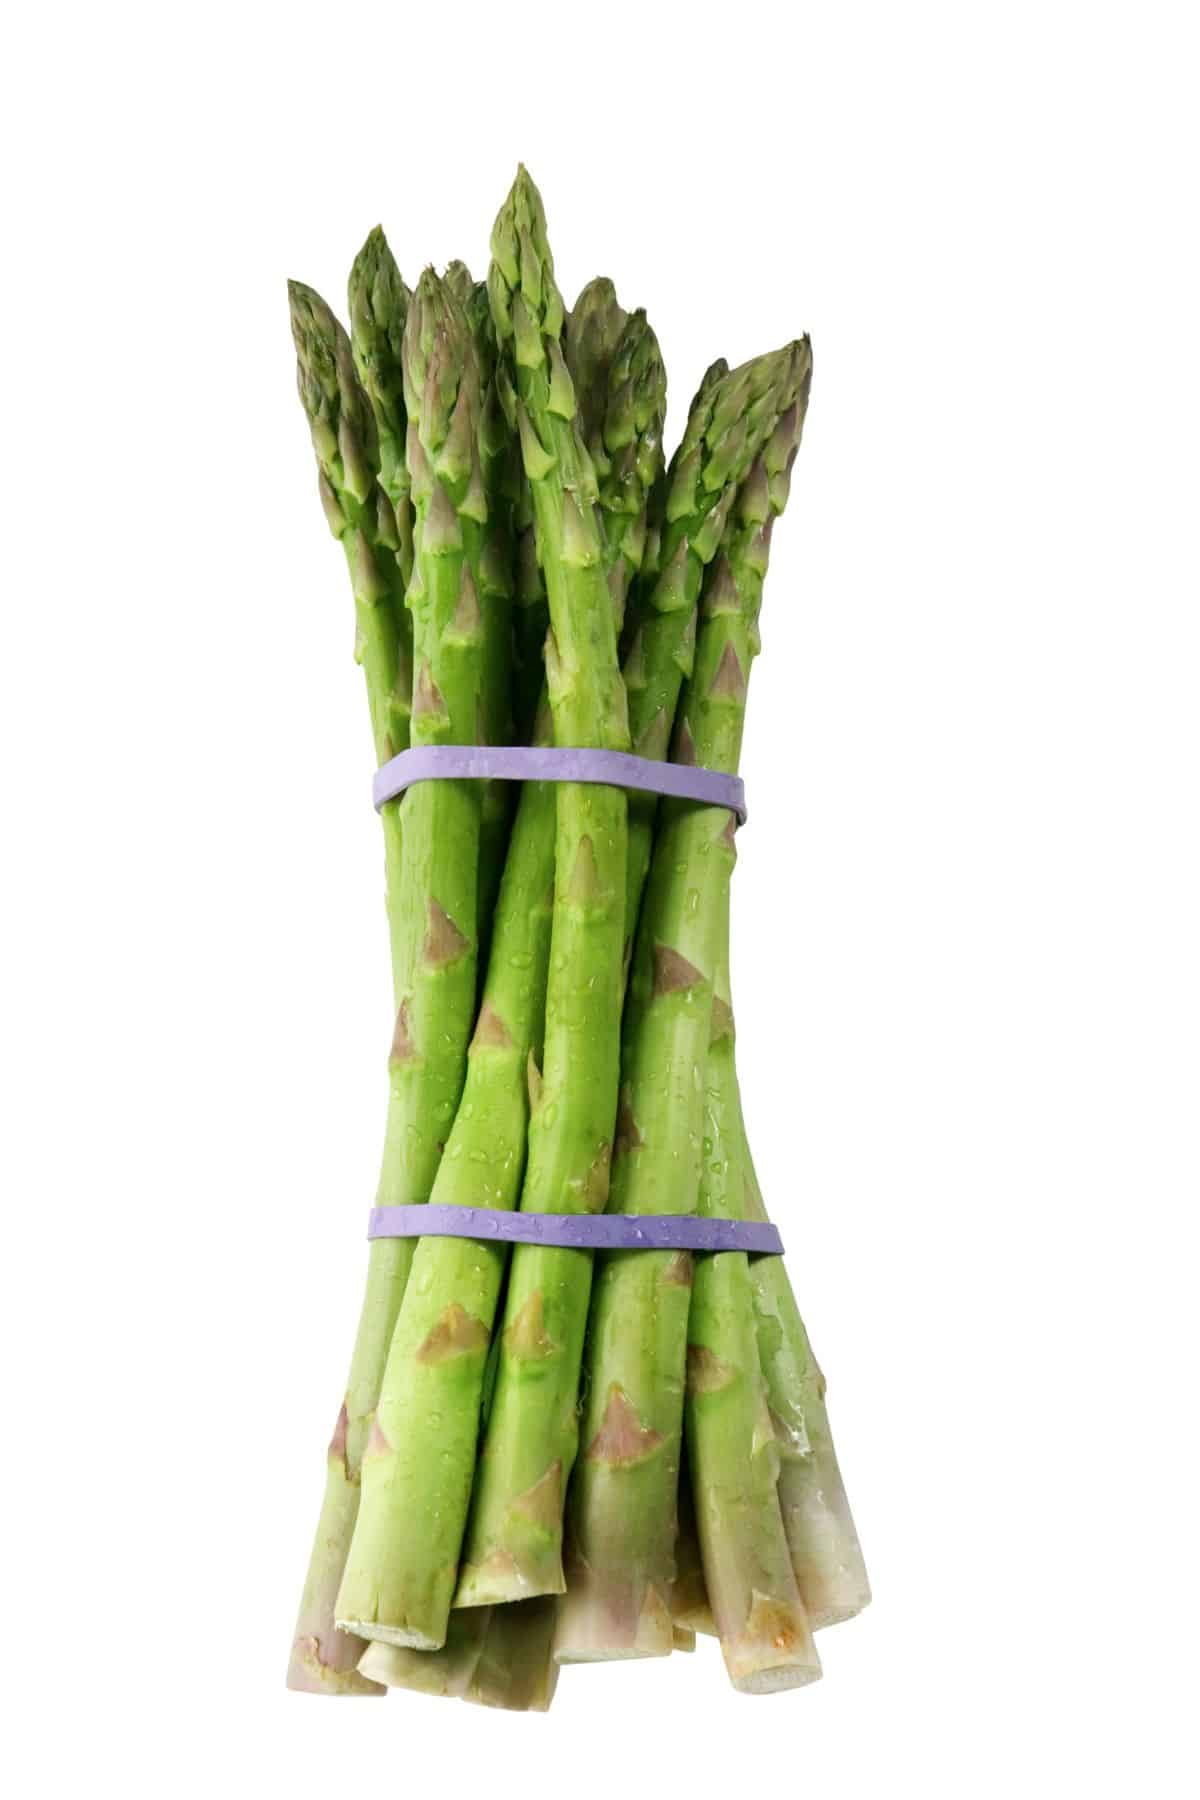 https://www.cleaneatingkitchen.com/wp-content/uploads/2023/10/photo-of-asparagus-on-table.jpg